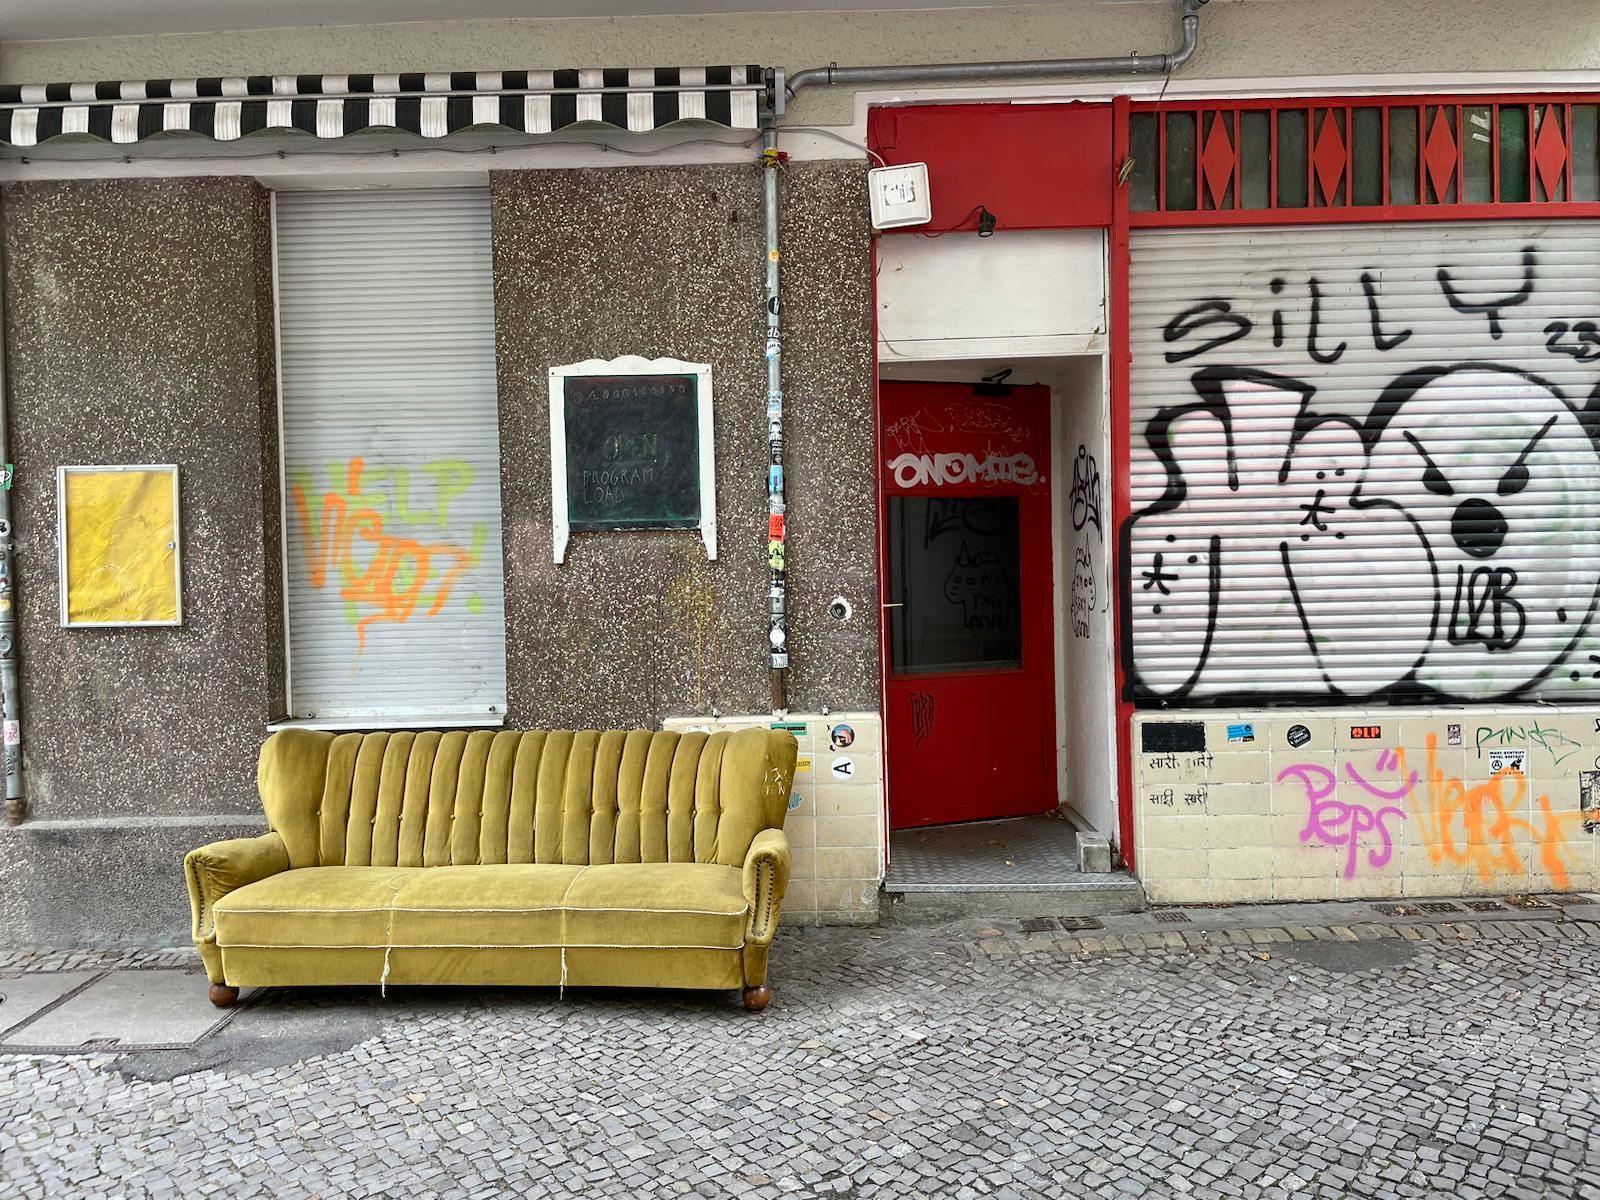 Front of the offline building, with graffiti and a yellow couch parked outside